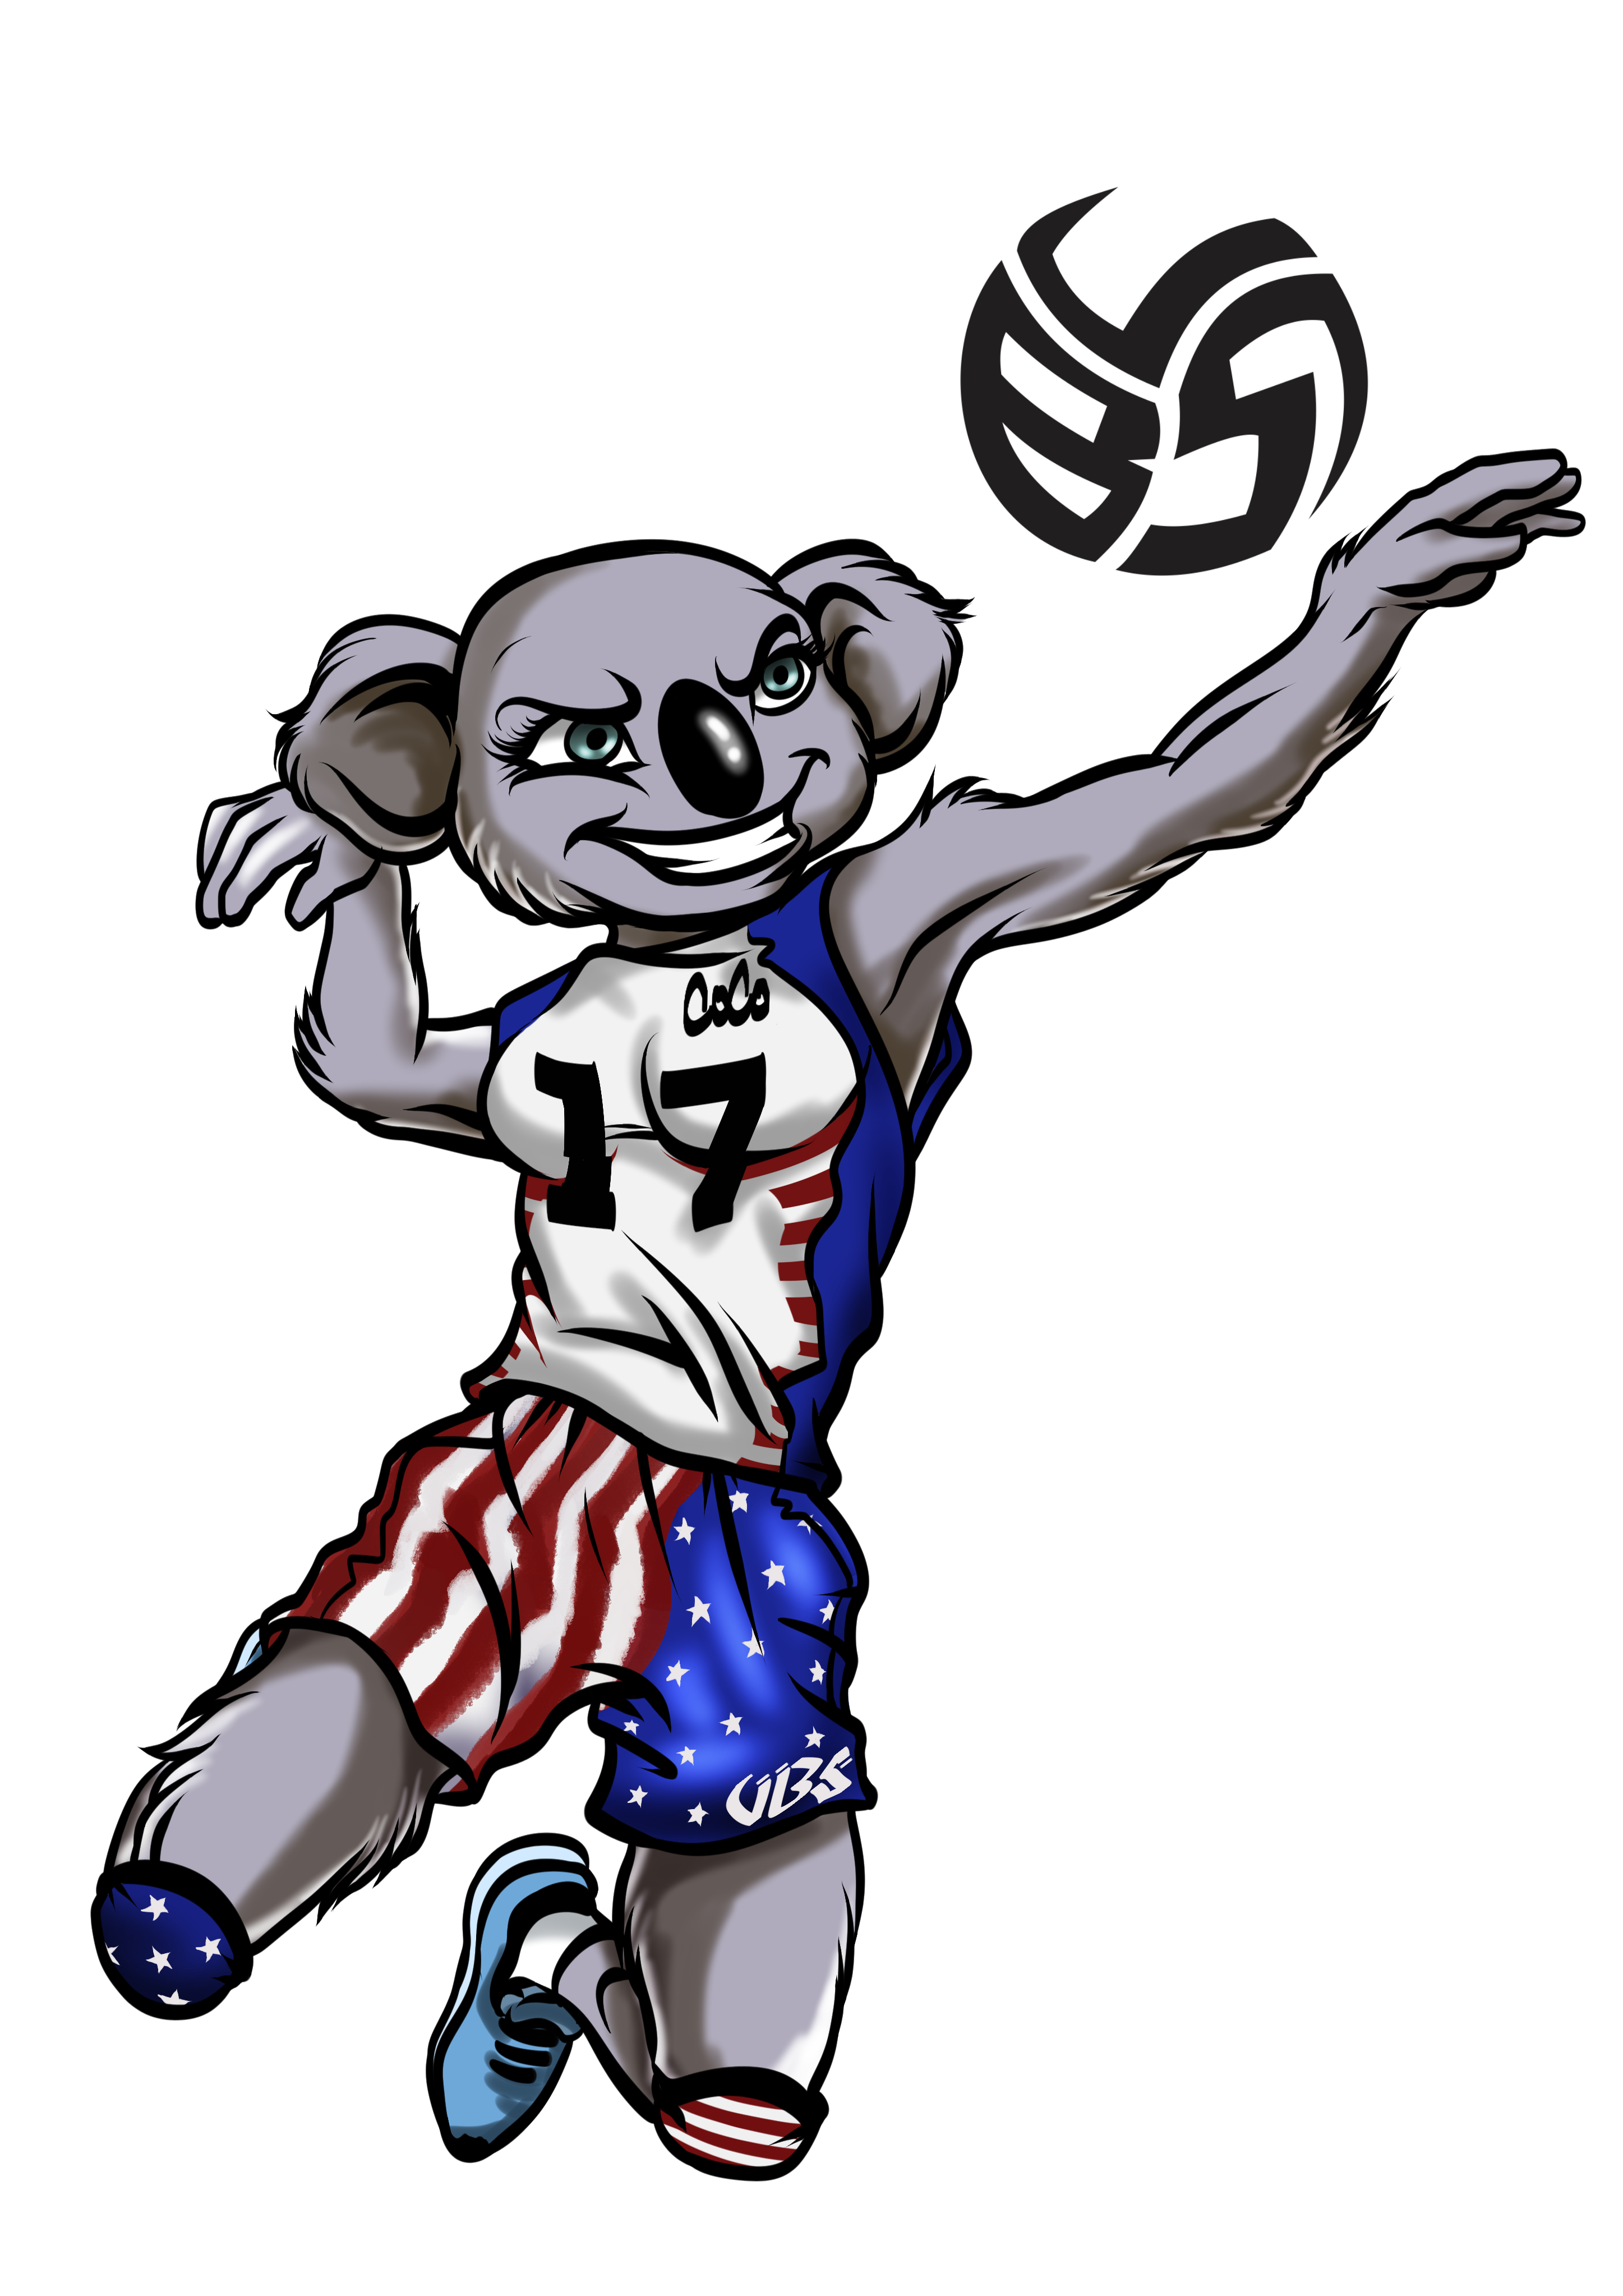 Meet Coco the Koala a female right side hitter on the Volleybragswag All Beast Third Team wearing the USA Flag inspired uniform.